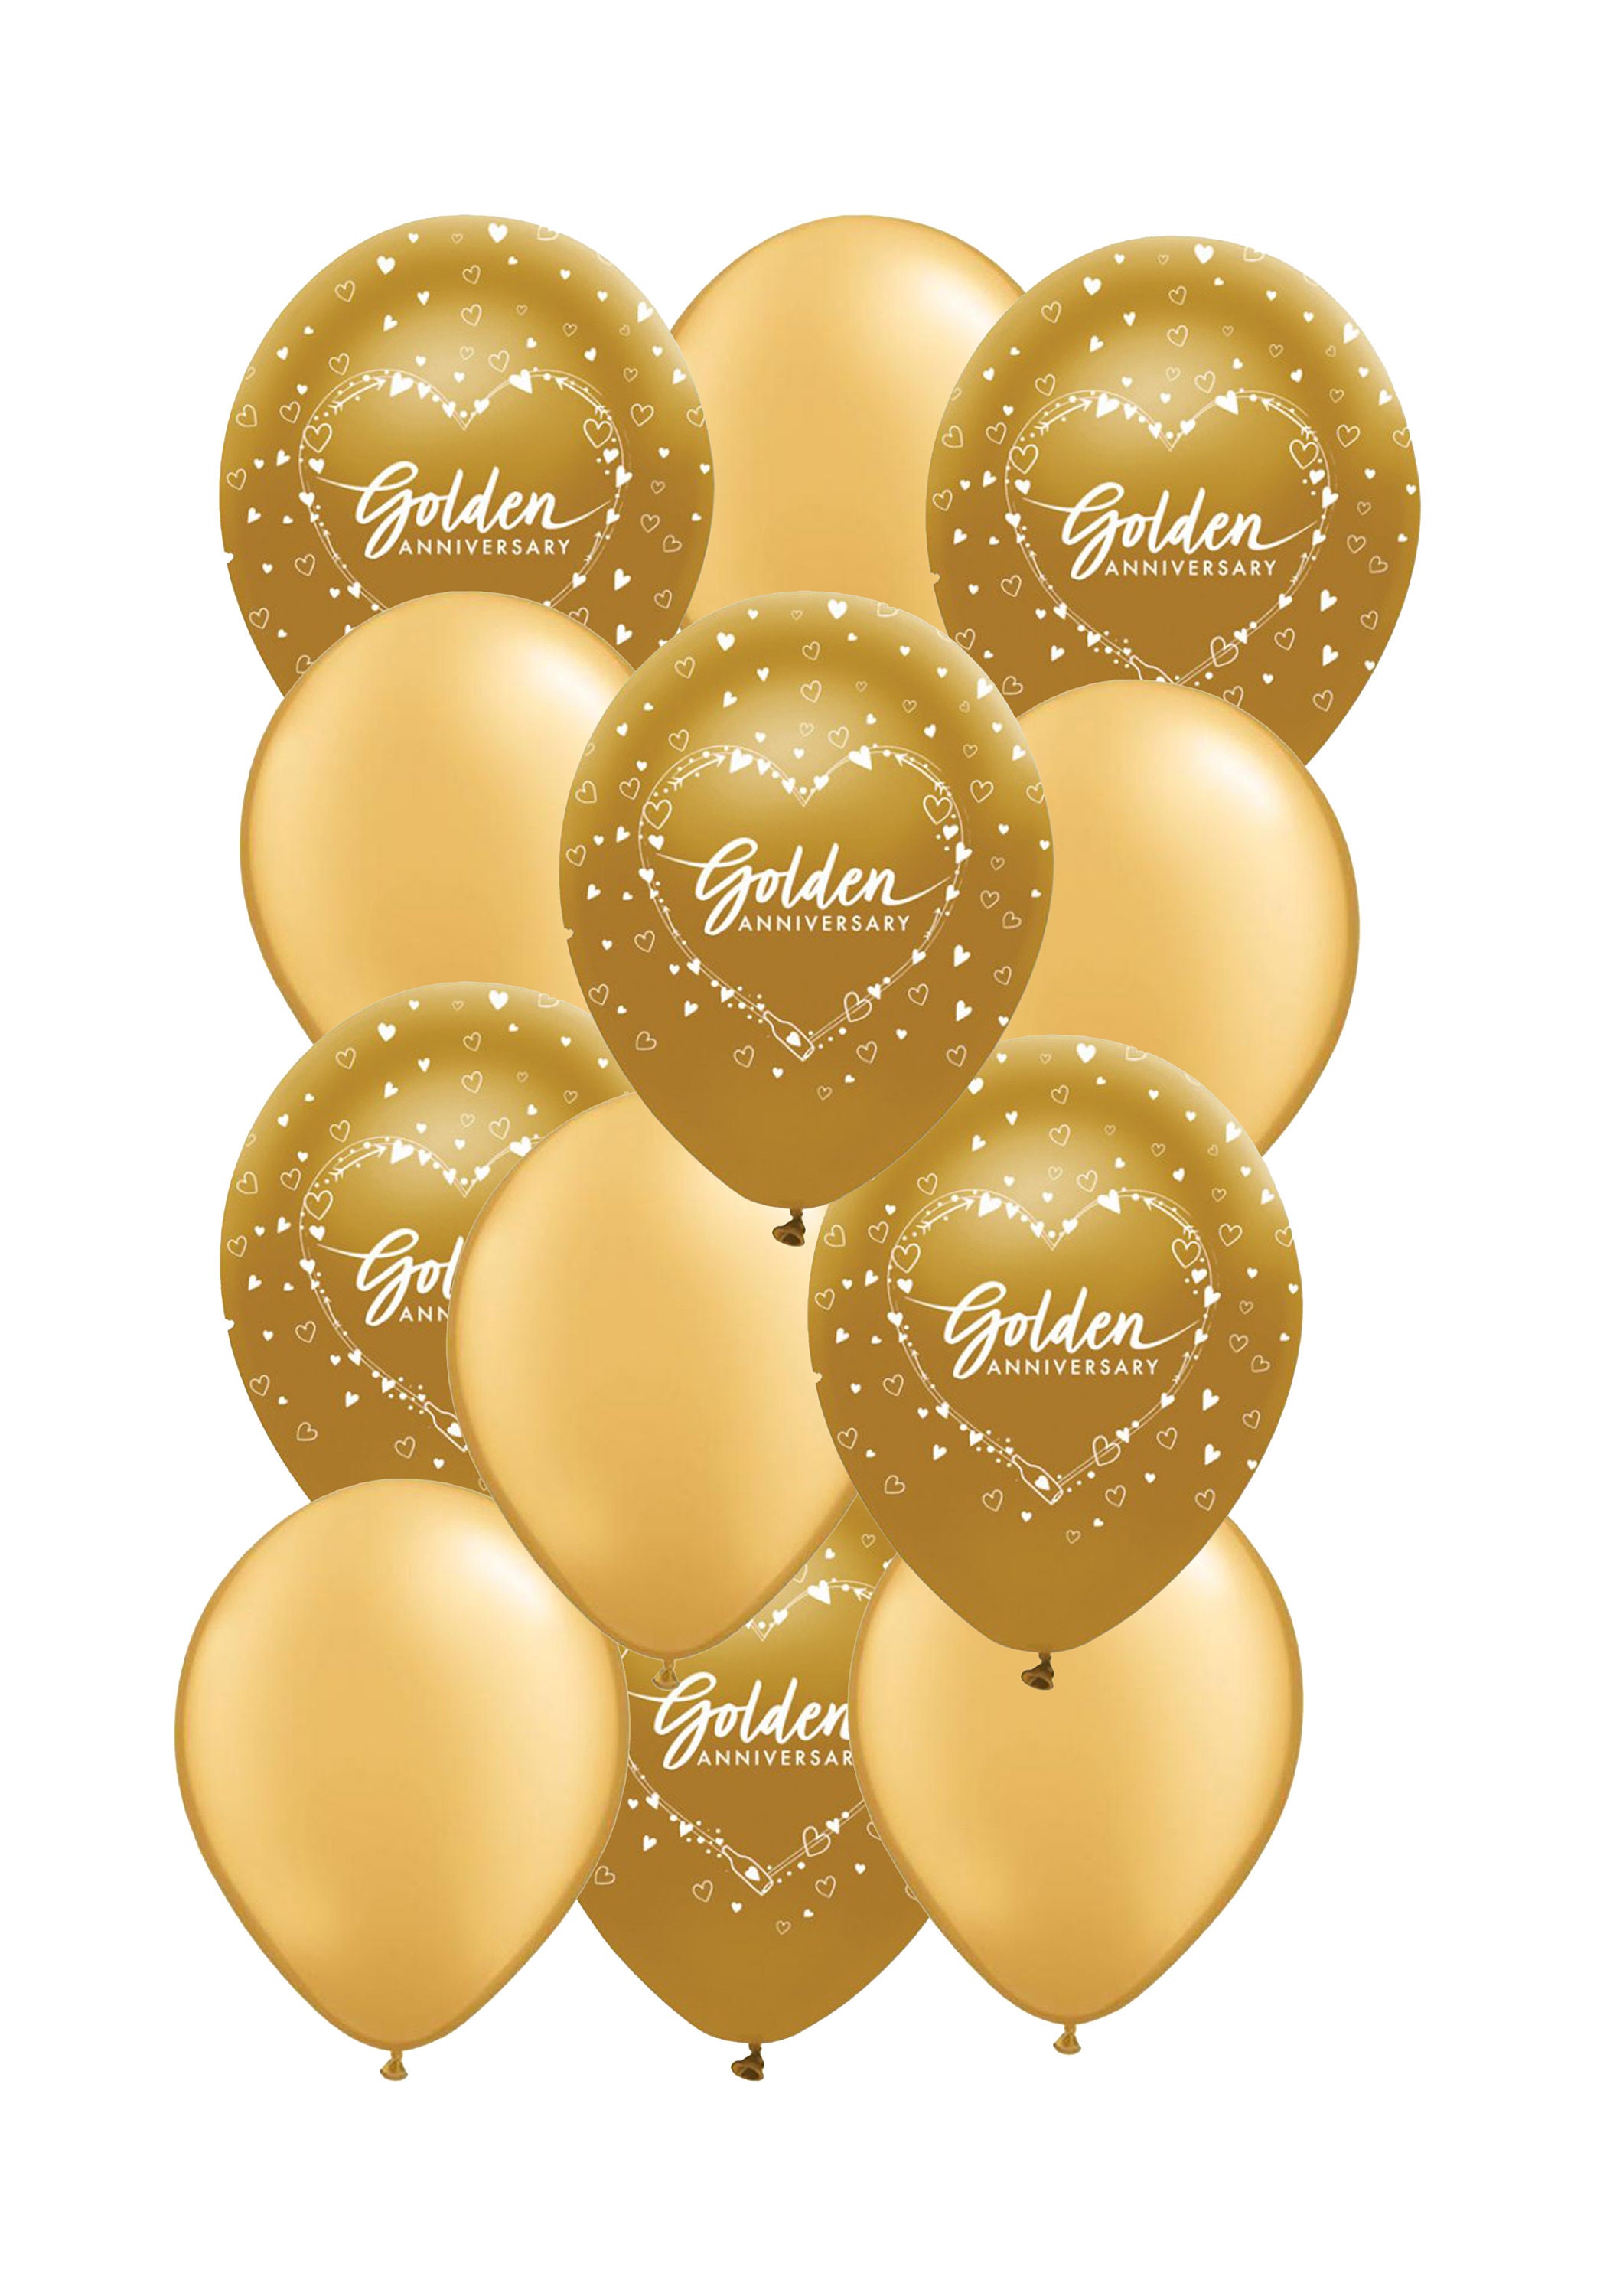 TABLE CENTREPIECE 3 PACK BALLOON DISPLAY GOLDEN  50TH WEDDING ANNIVERSARY 